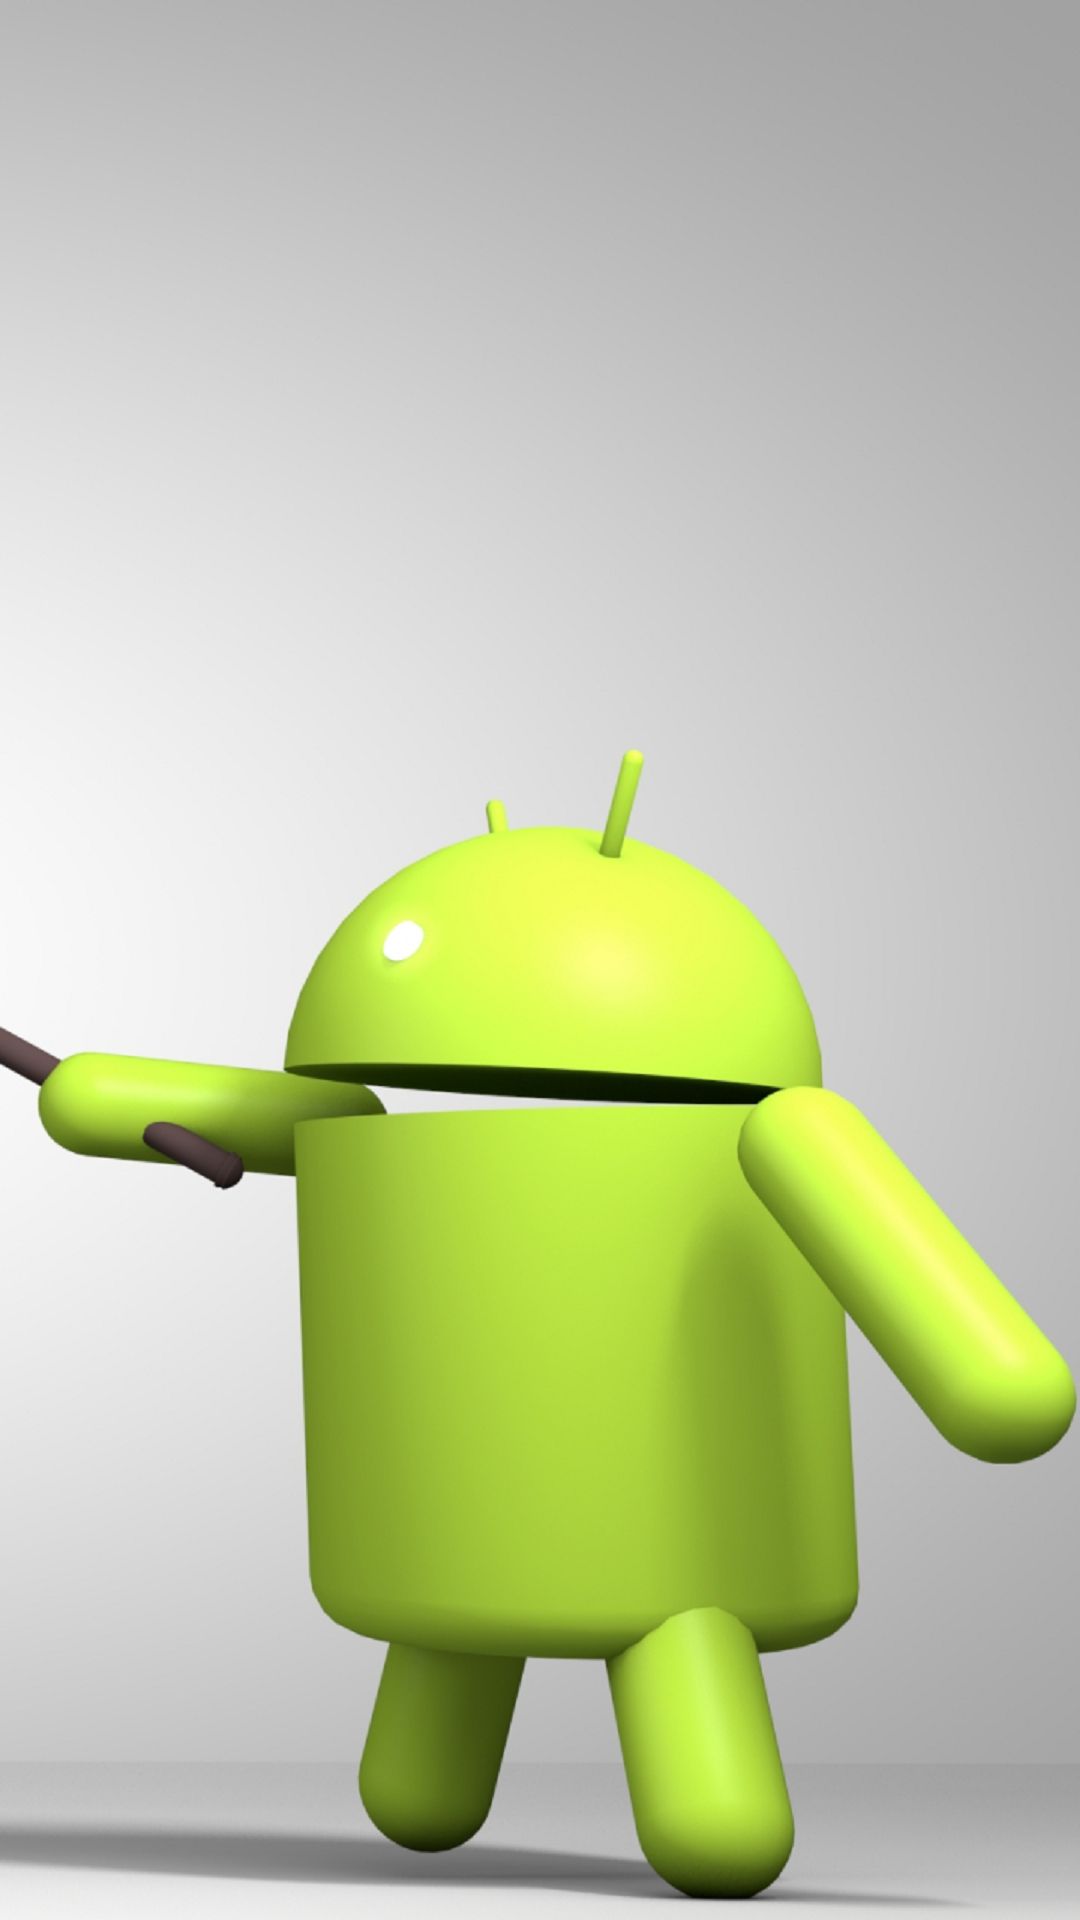 3d Android Logo Green Render Iphone 6 Plus Hd Wallpaper - Android Vs Apple , HD Wallpaper & Backgrounds